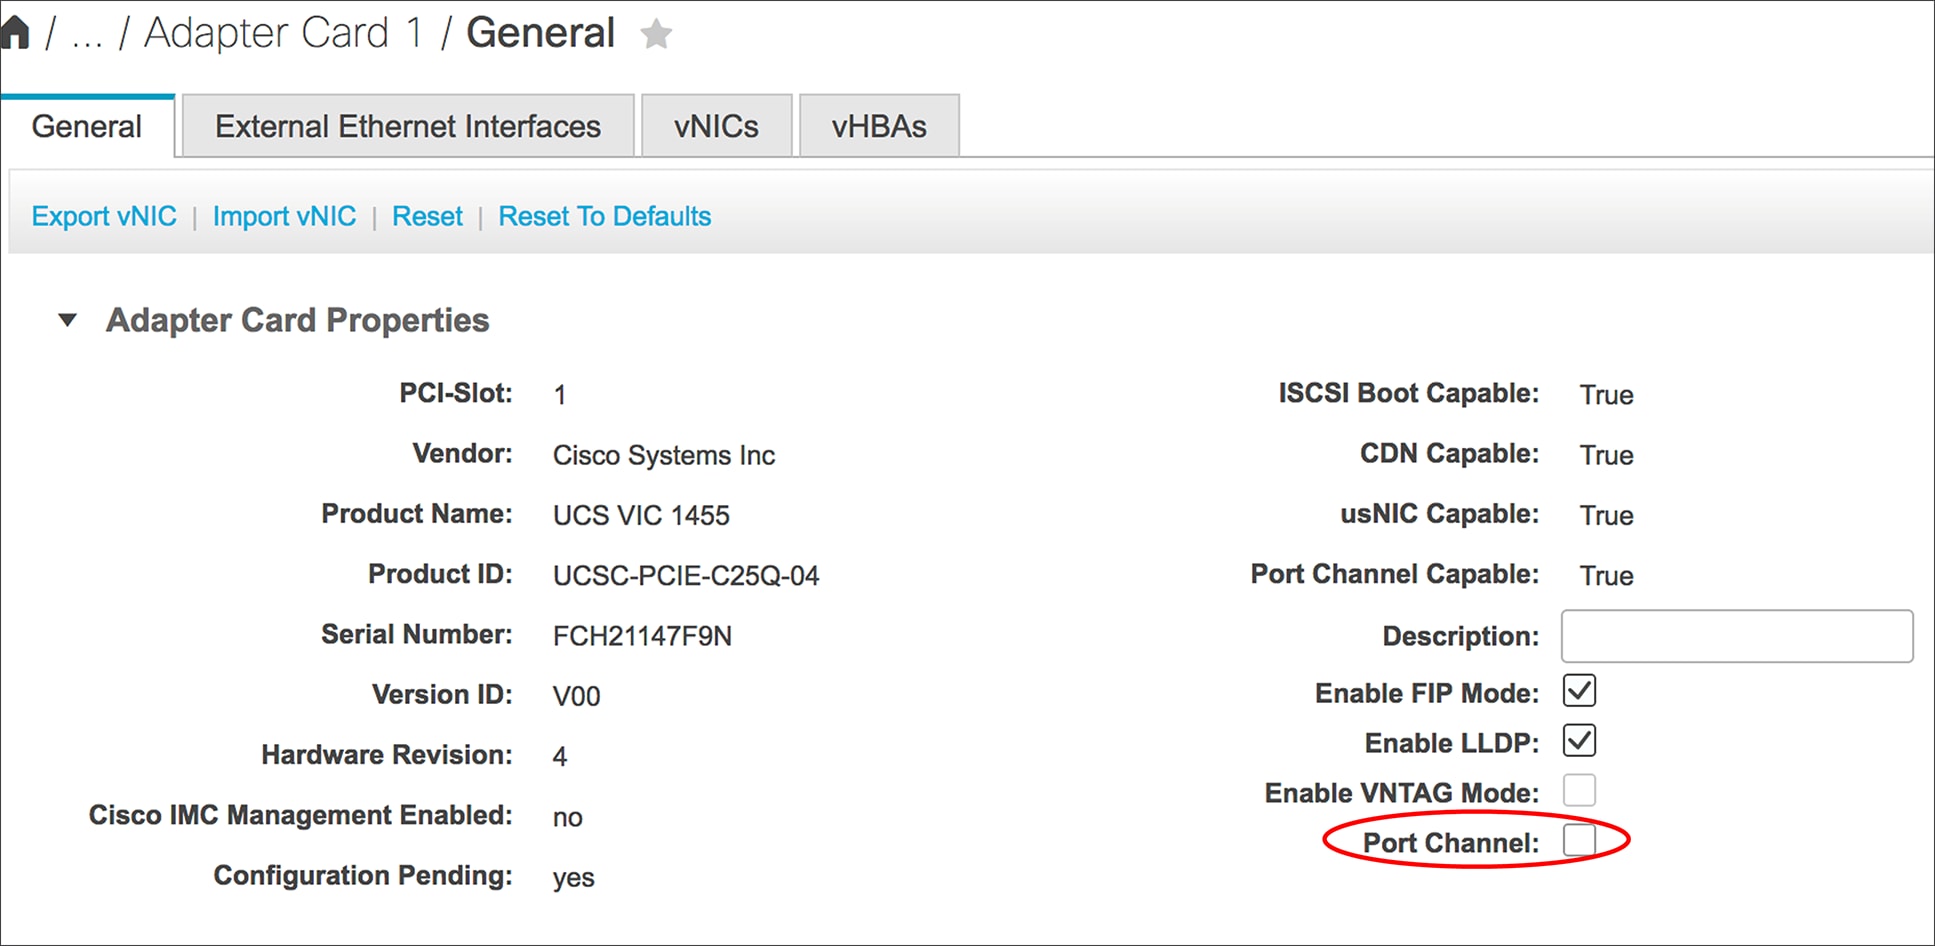 Disabling default port-channeling from Cisco IMC